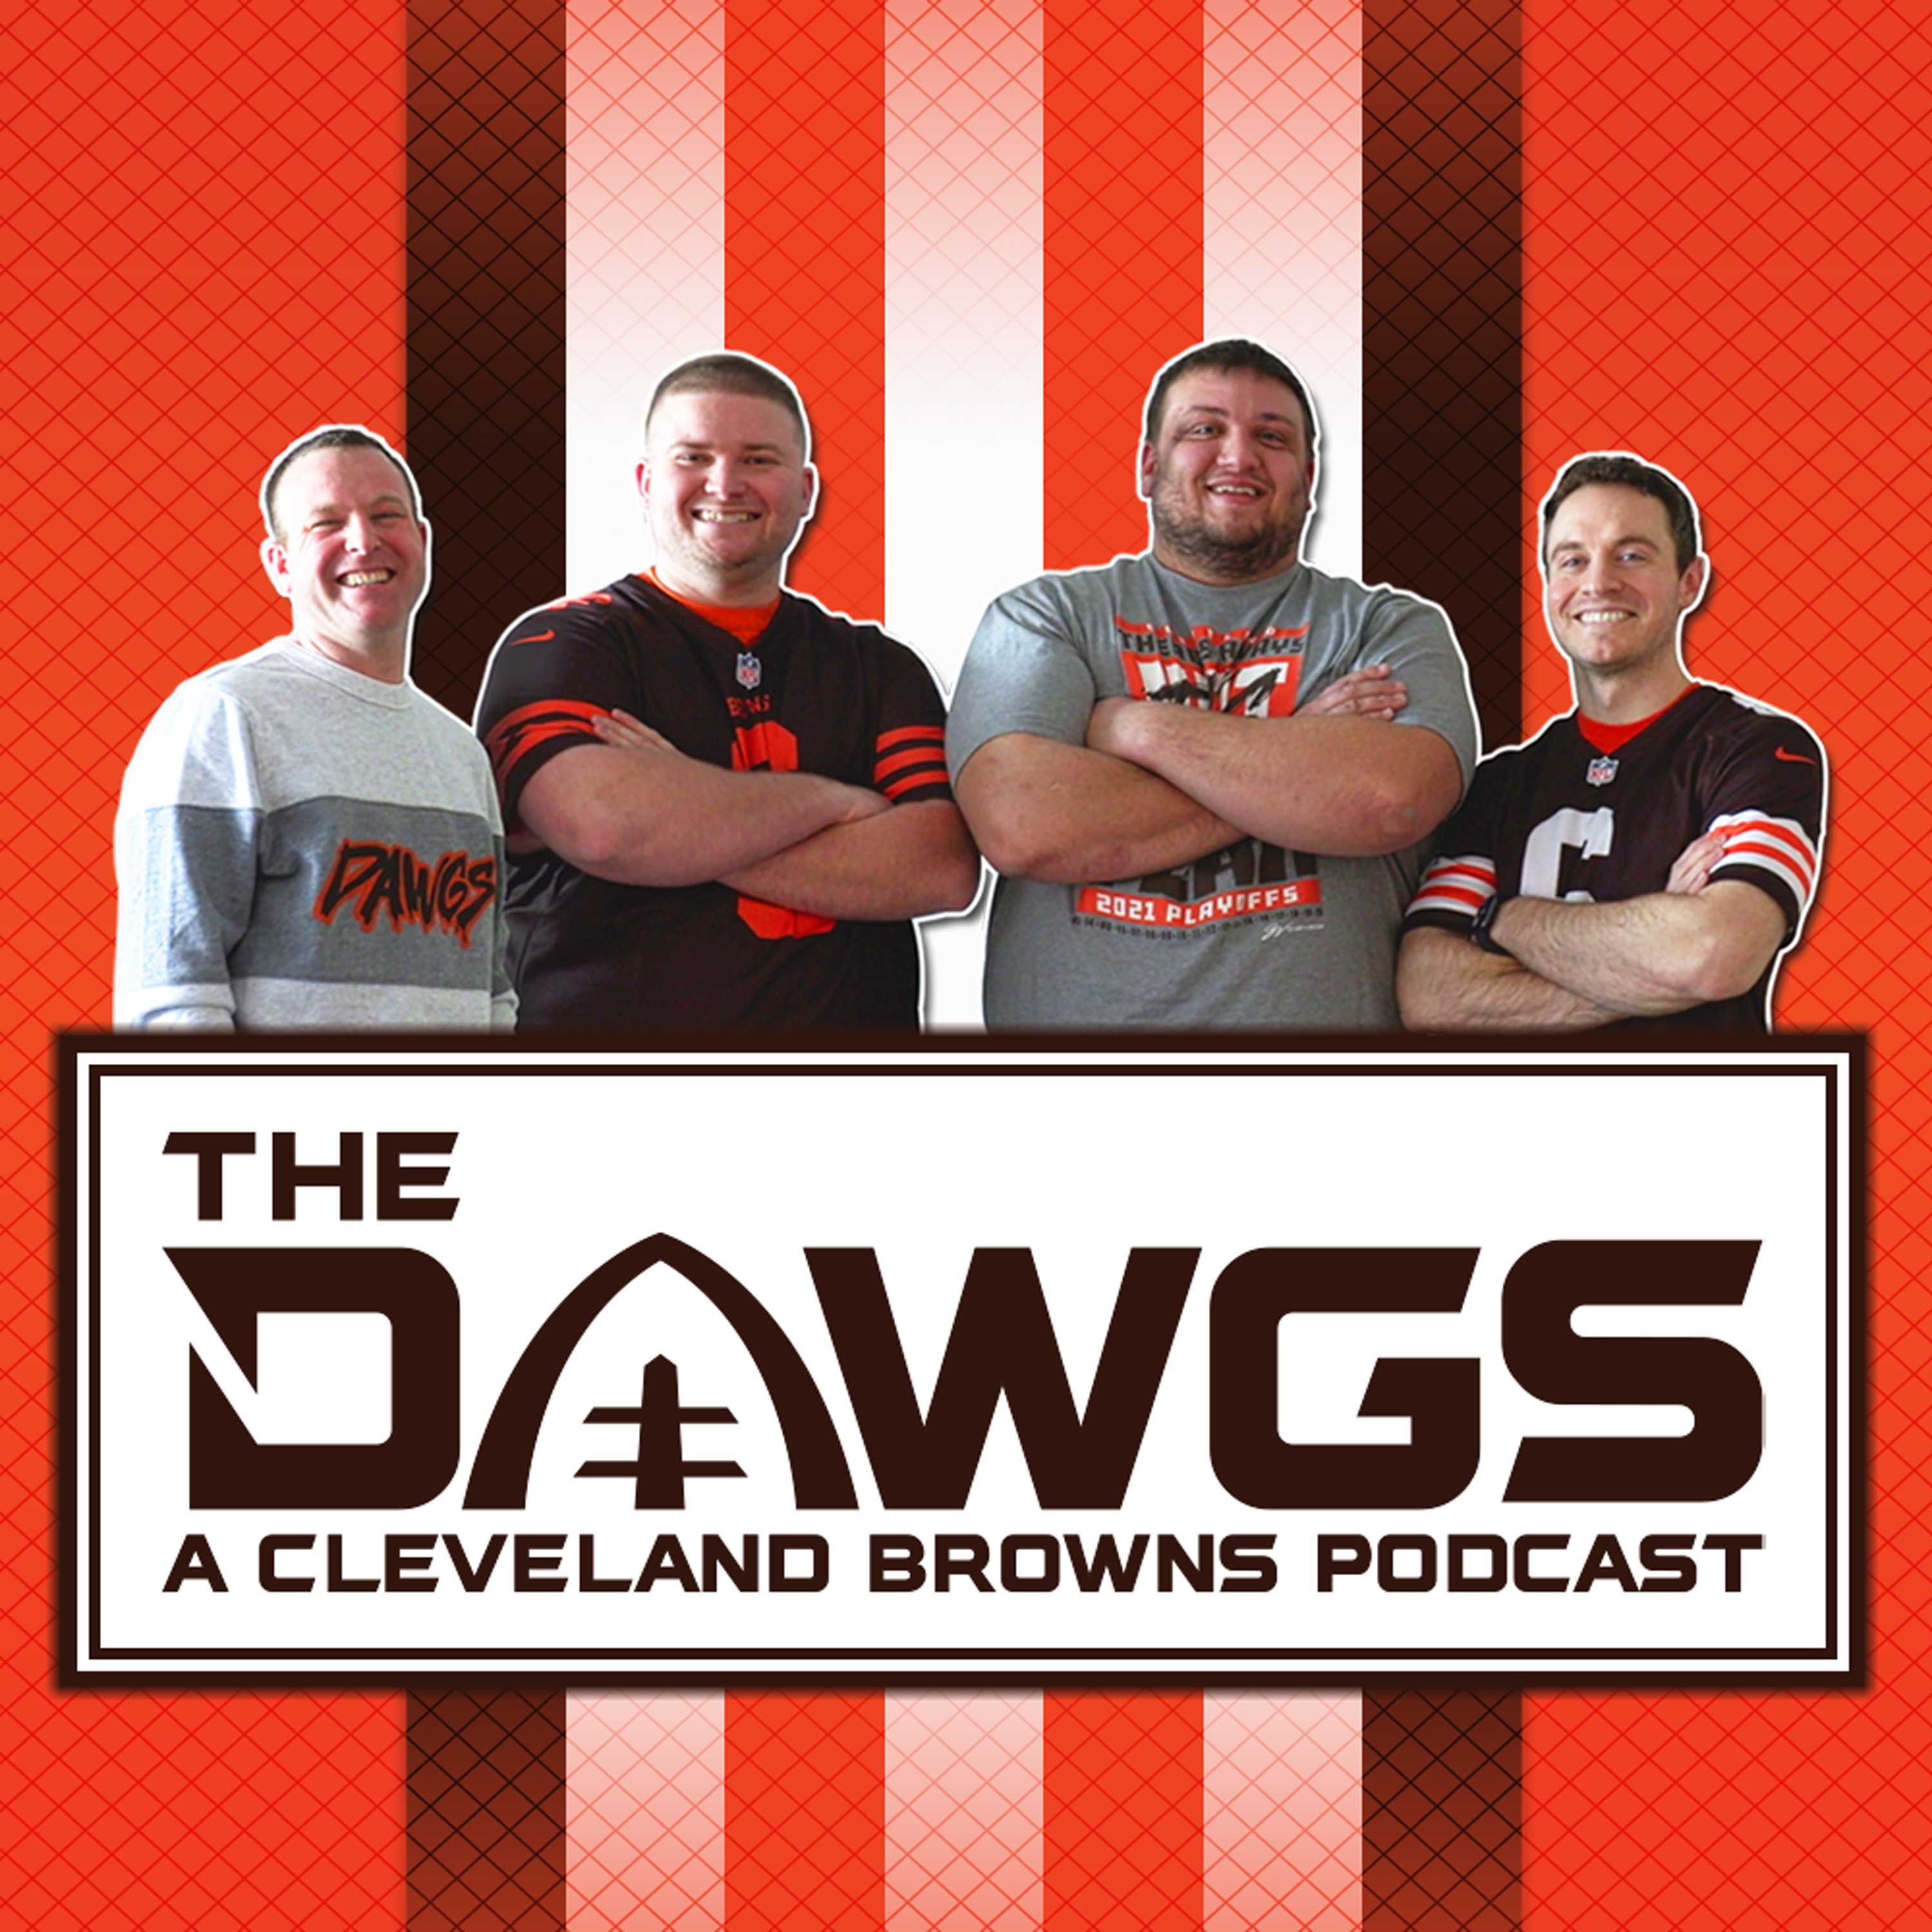 LIVE Q&A with Barry Shuck from DawgsByNature.com | The Dawgs - A Cleveland Browns Podcast - October 30, 2021